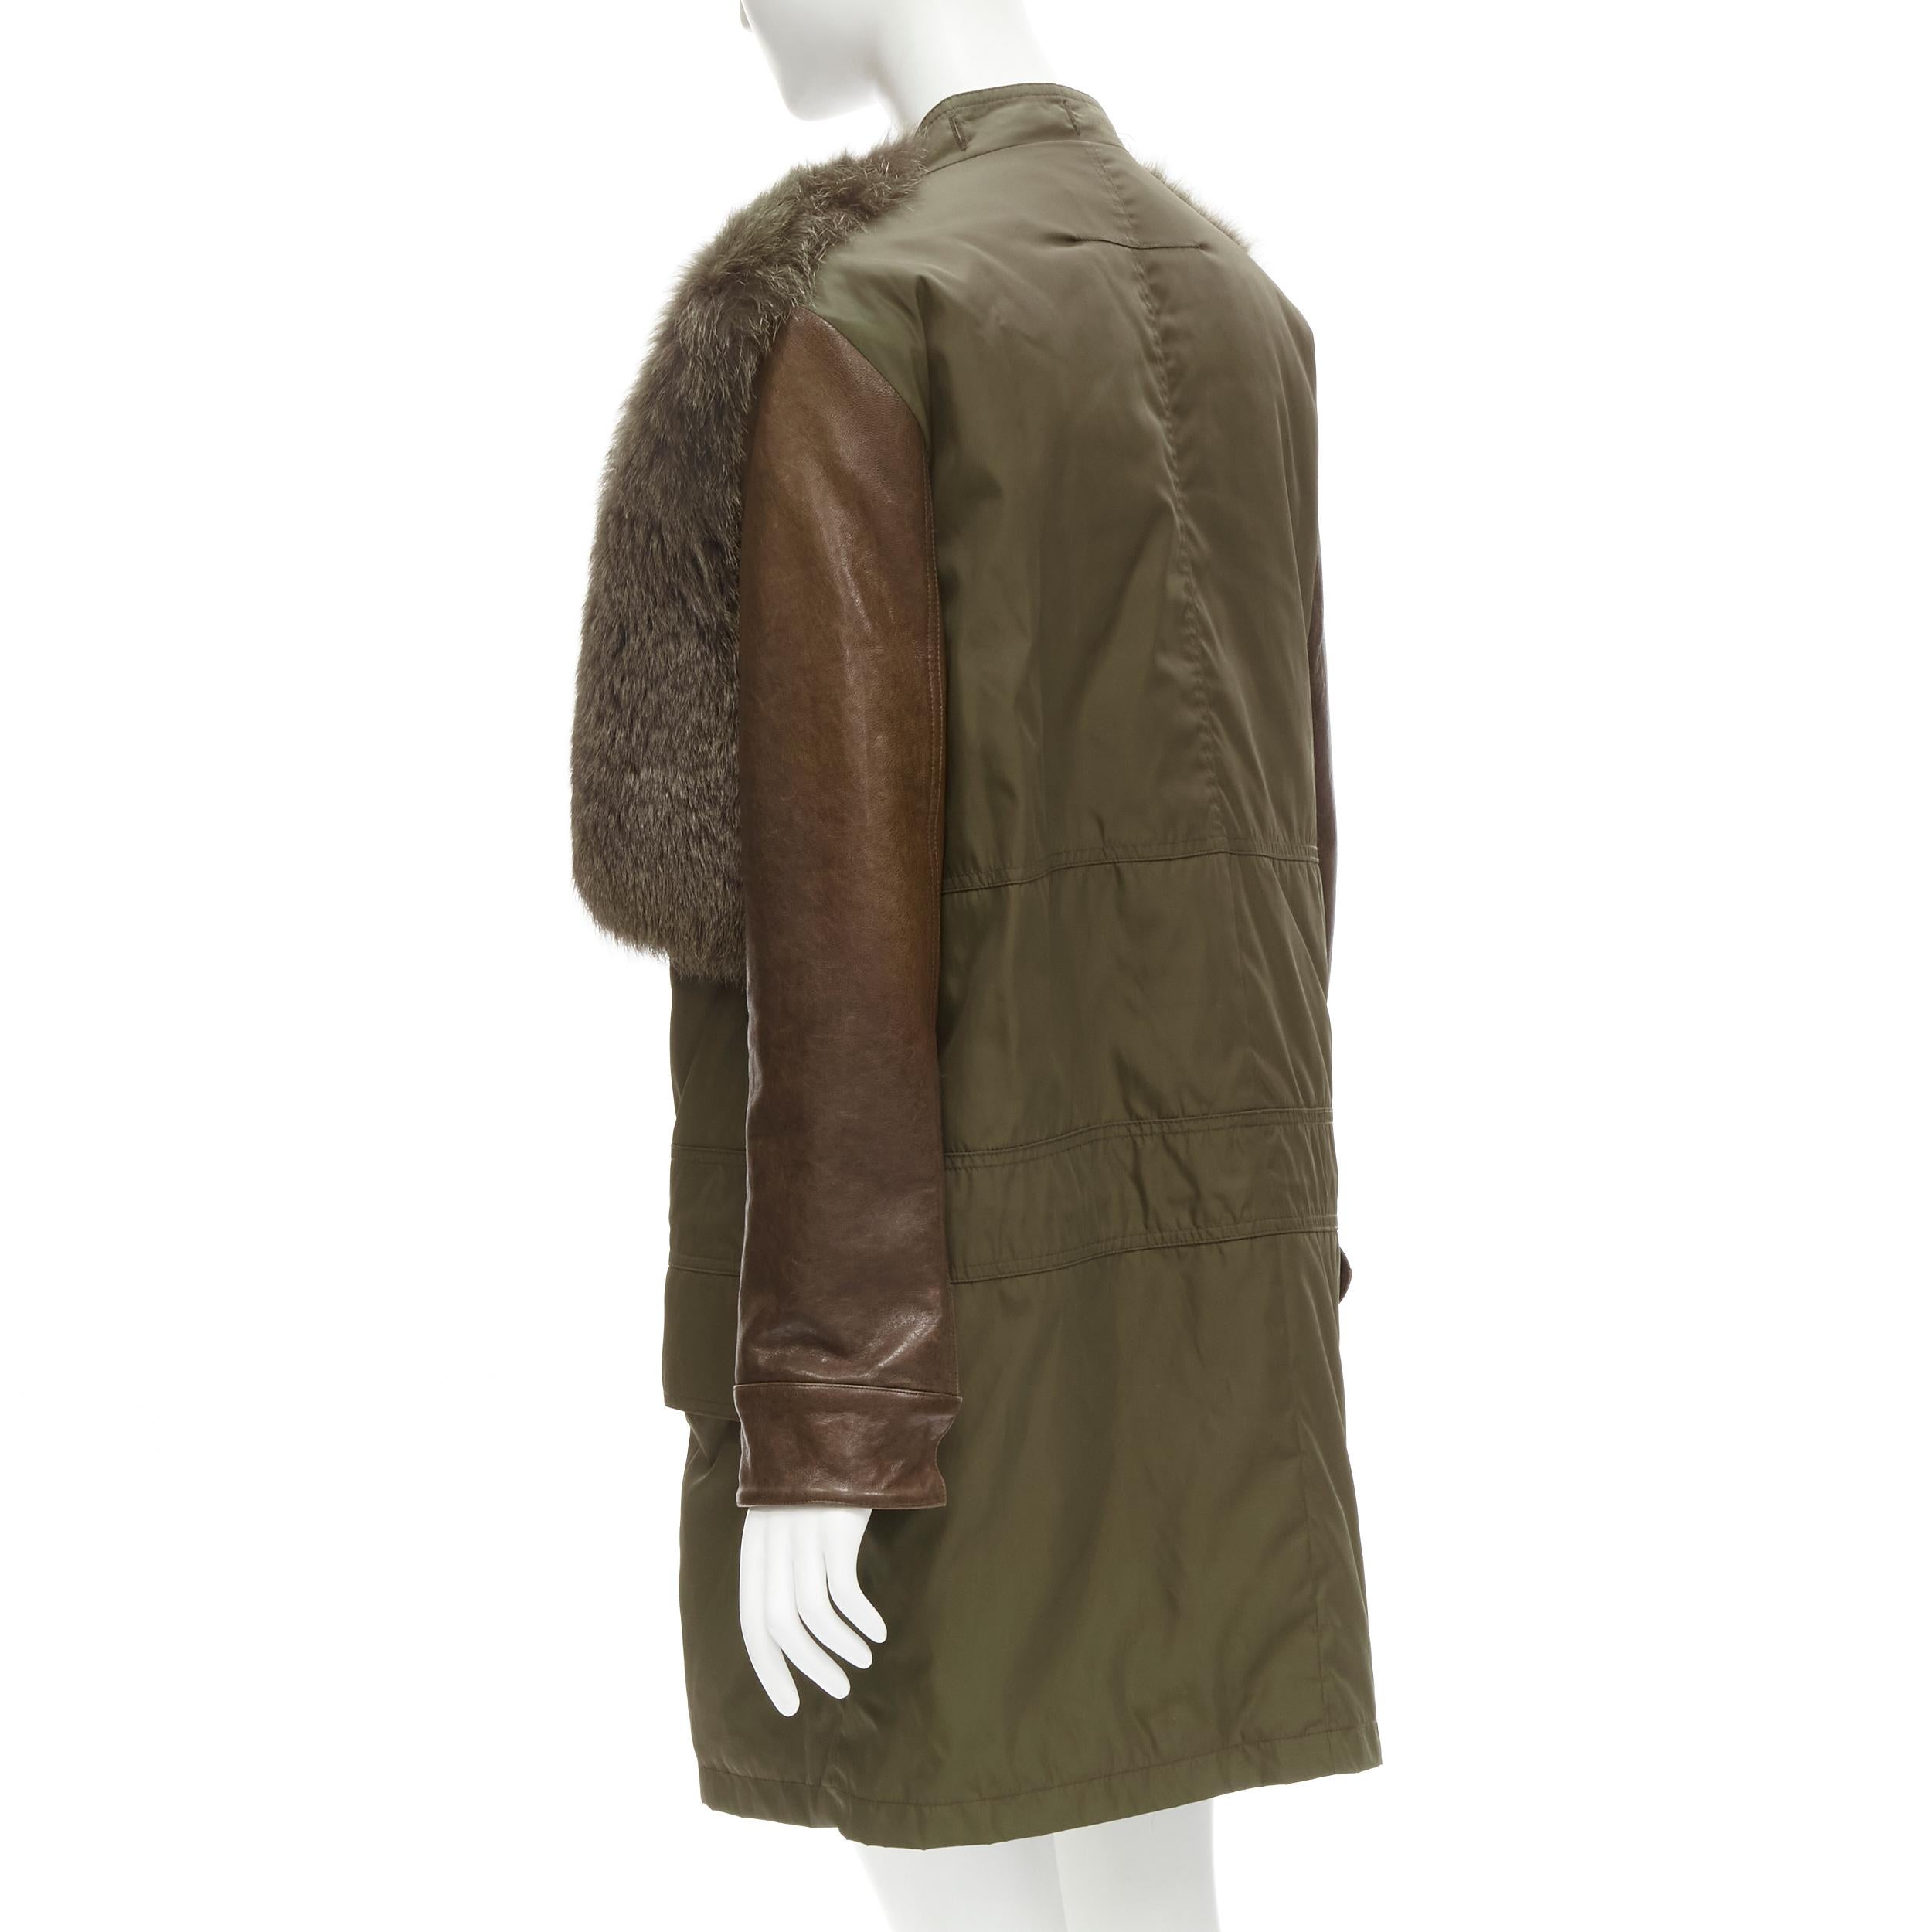 Women's GIVENCHY Riccardo Tisci green leather sleeve fox fur anorak coat FR34 XS For Sale